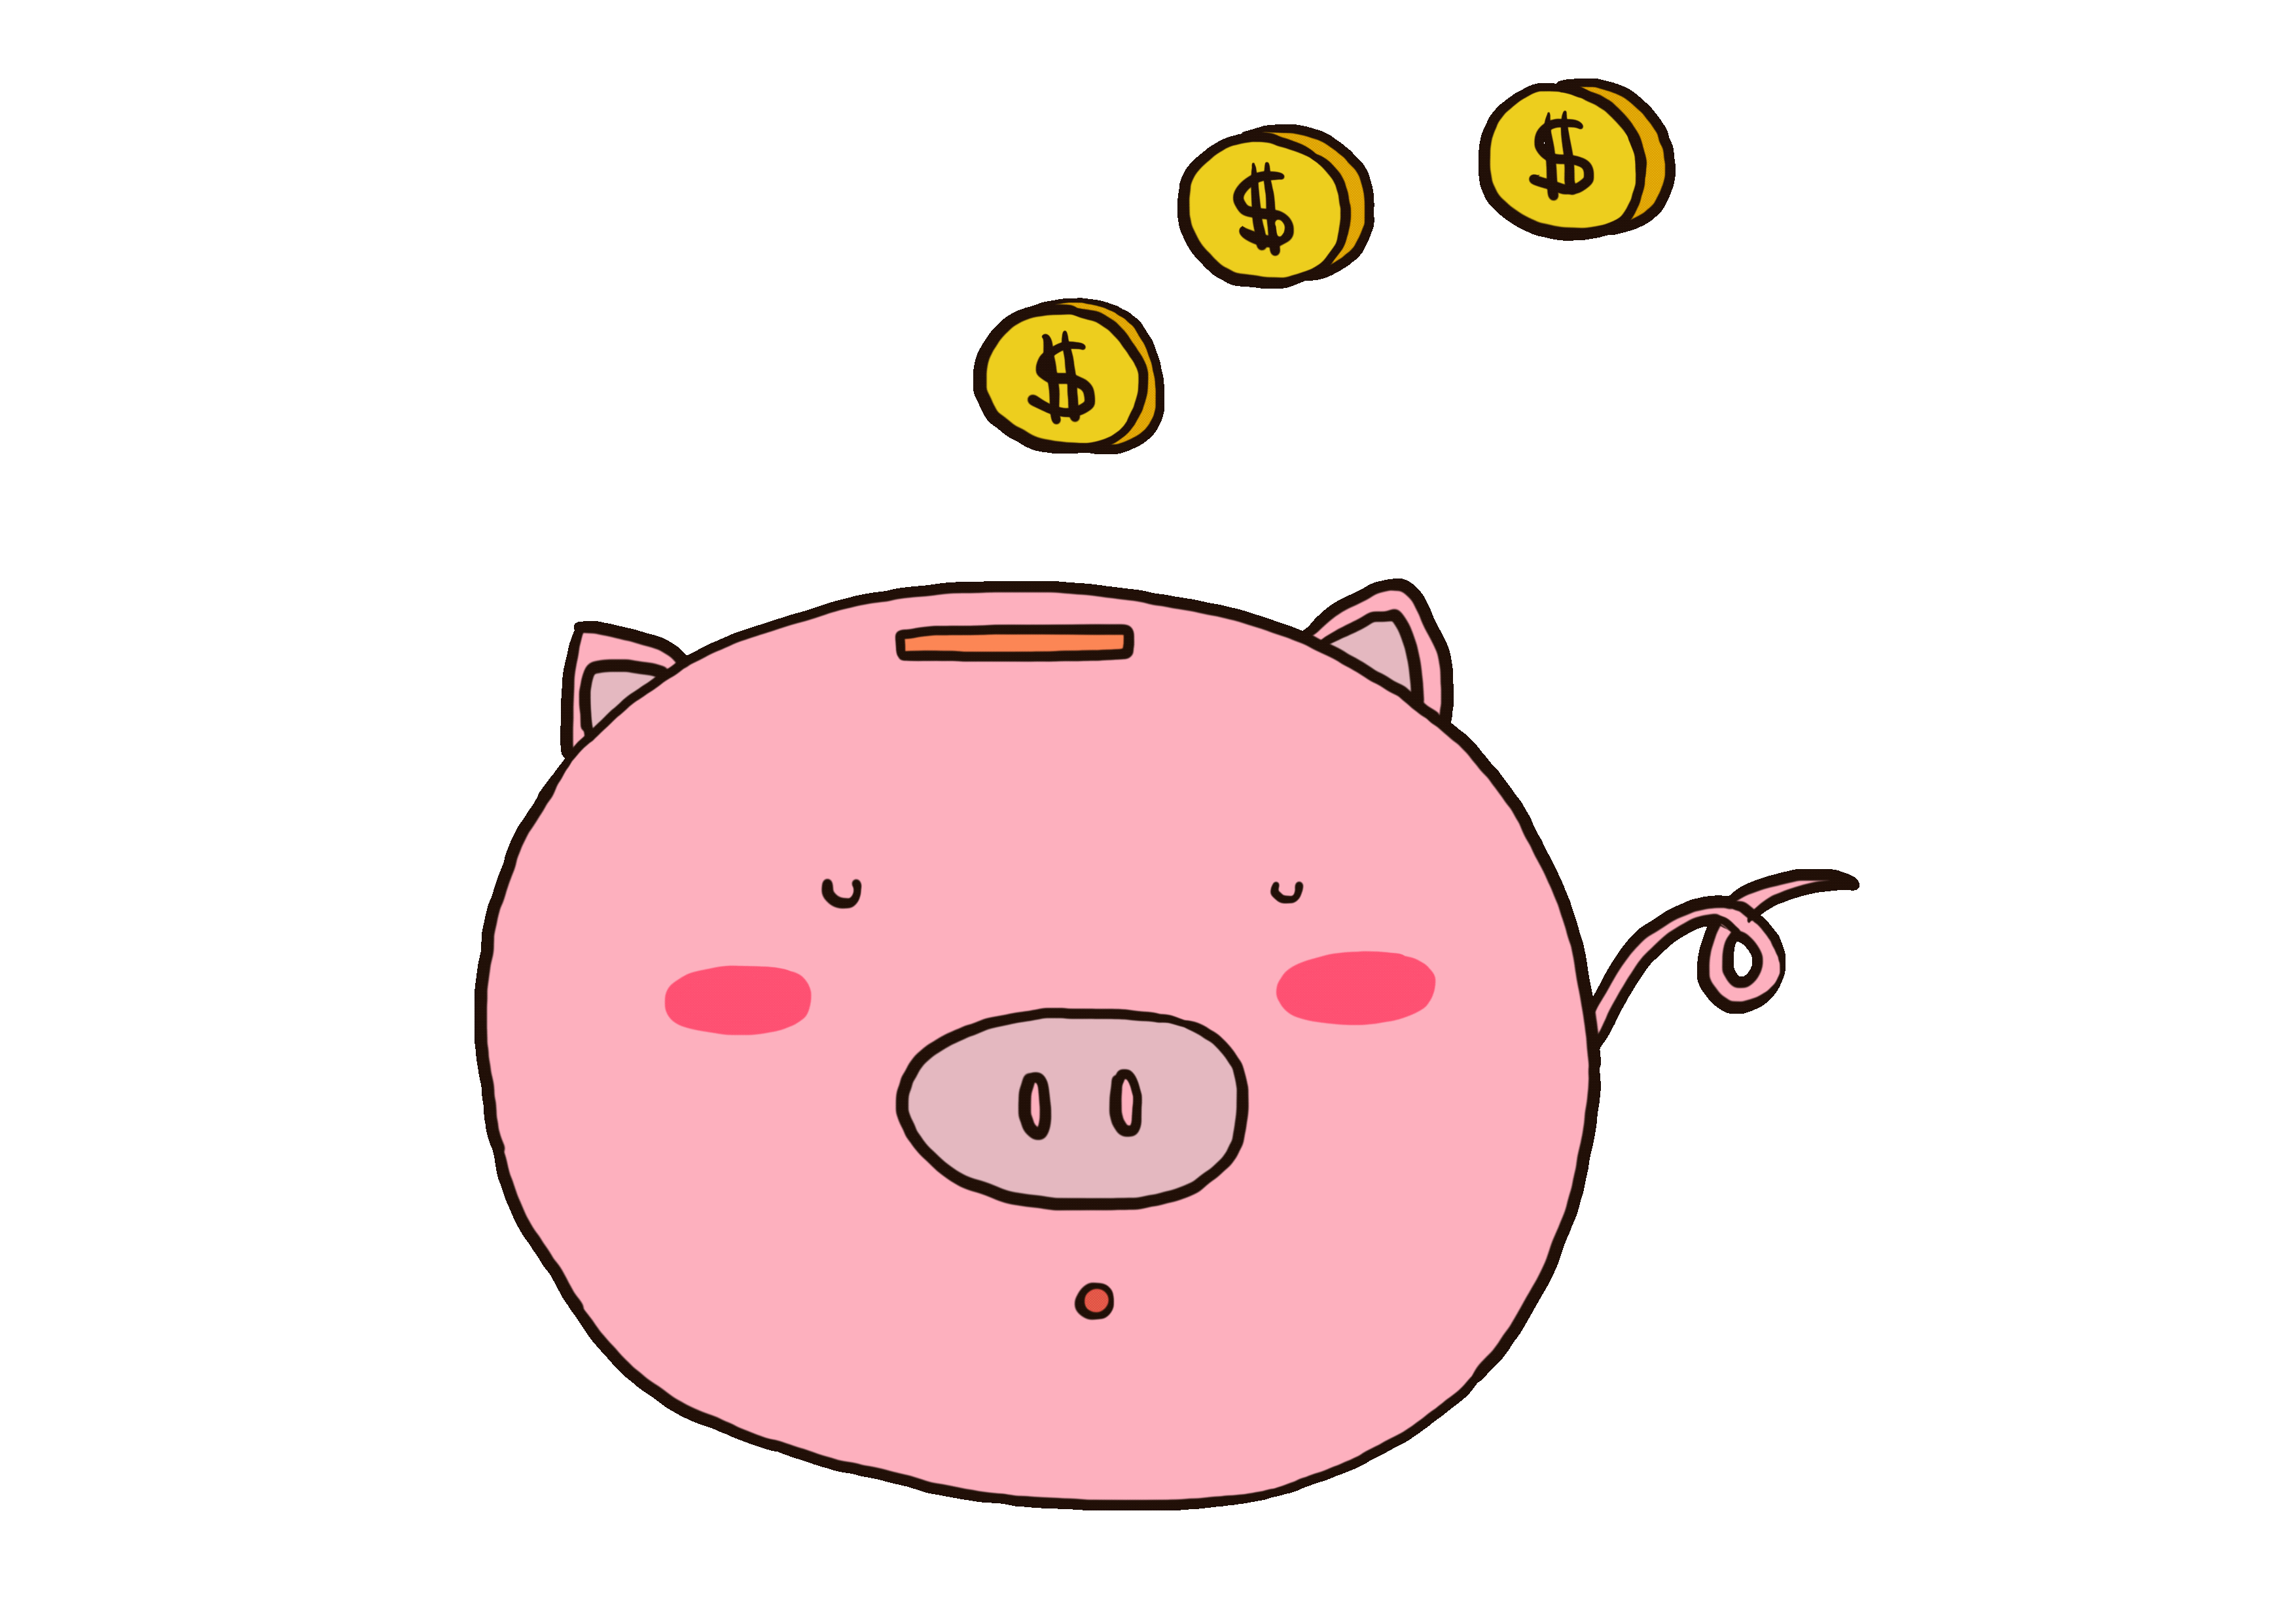 Savings Piggy Bank Sticker by cypru55 for iOS & Android | GIPHY